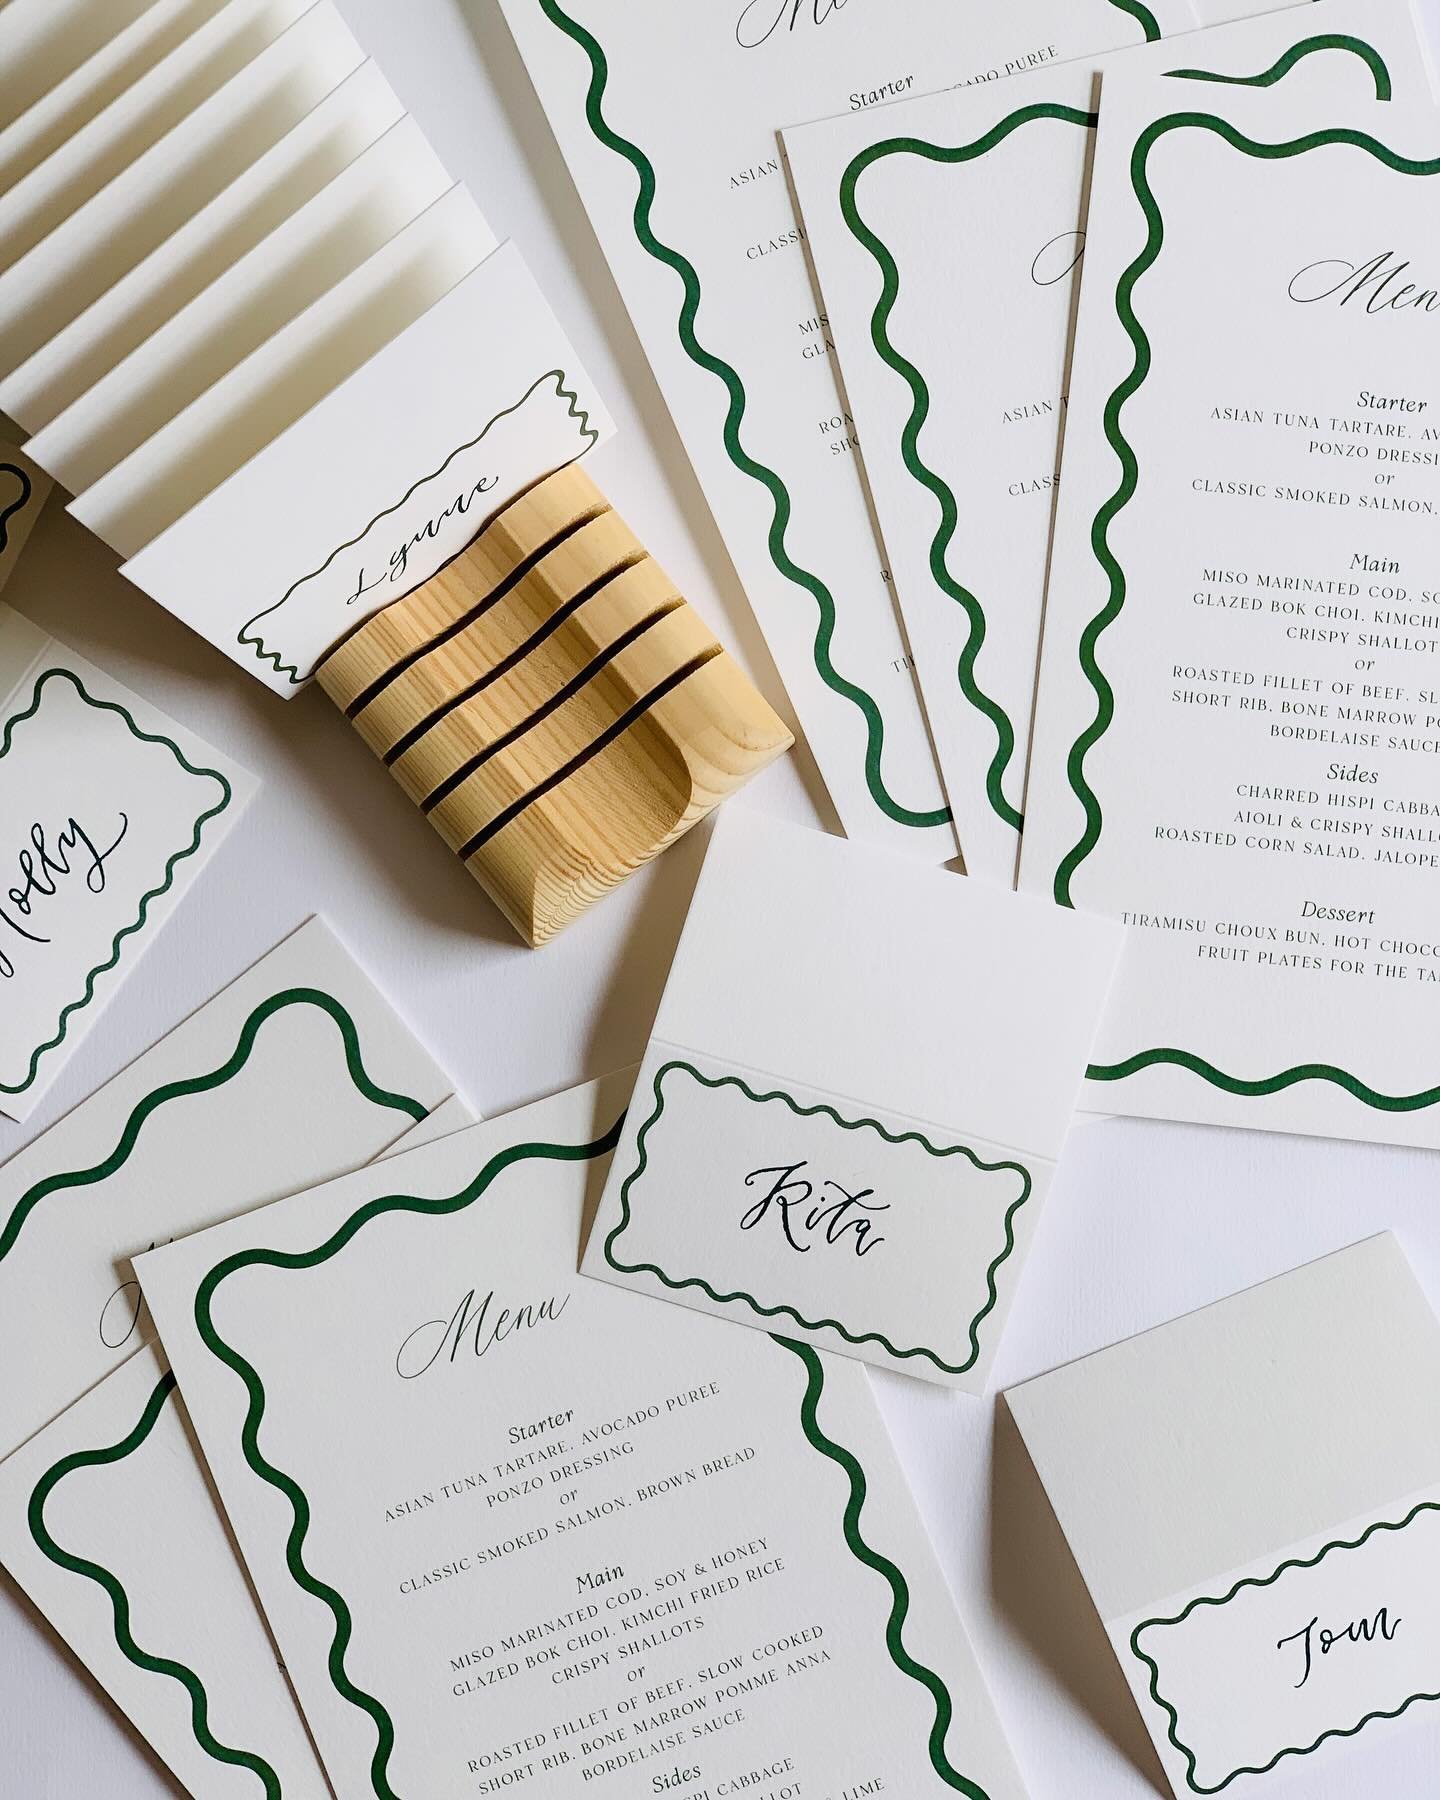 The cutest guest name cards and menus for a special birthday celebration last month ✨

@dkinteriors 
@tomsstudio 

#calligraphylettering 
#guestnamecards 
#specialbirthdaycelebrations 
#forestgreenink 
#leftylettering 
#scallopedgedesign 
#menudesign